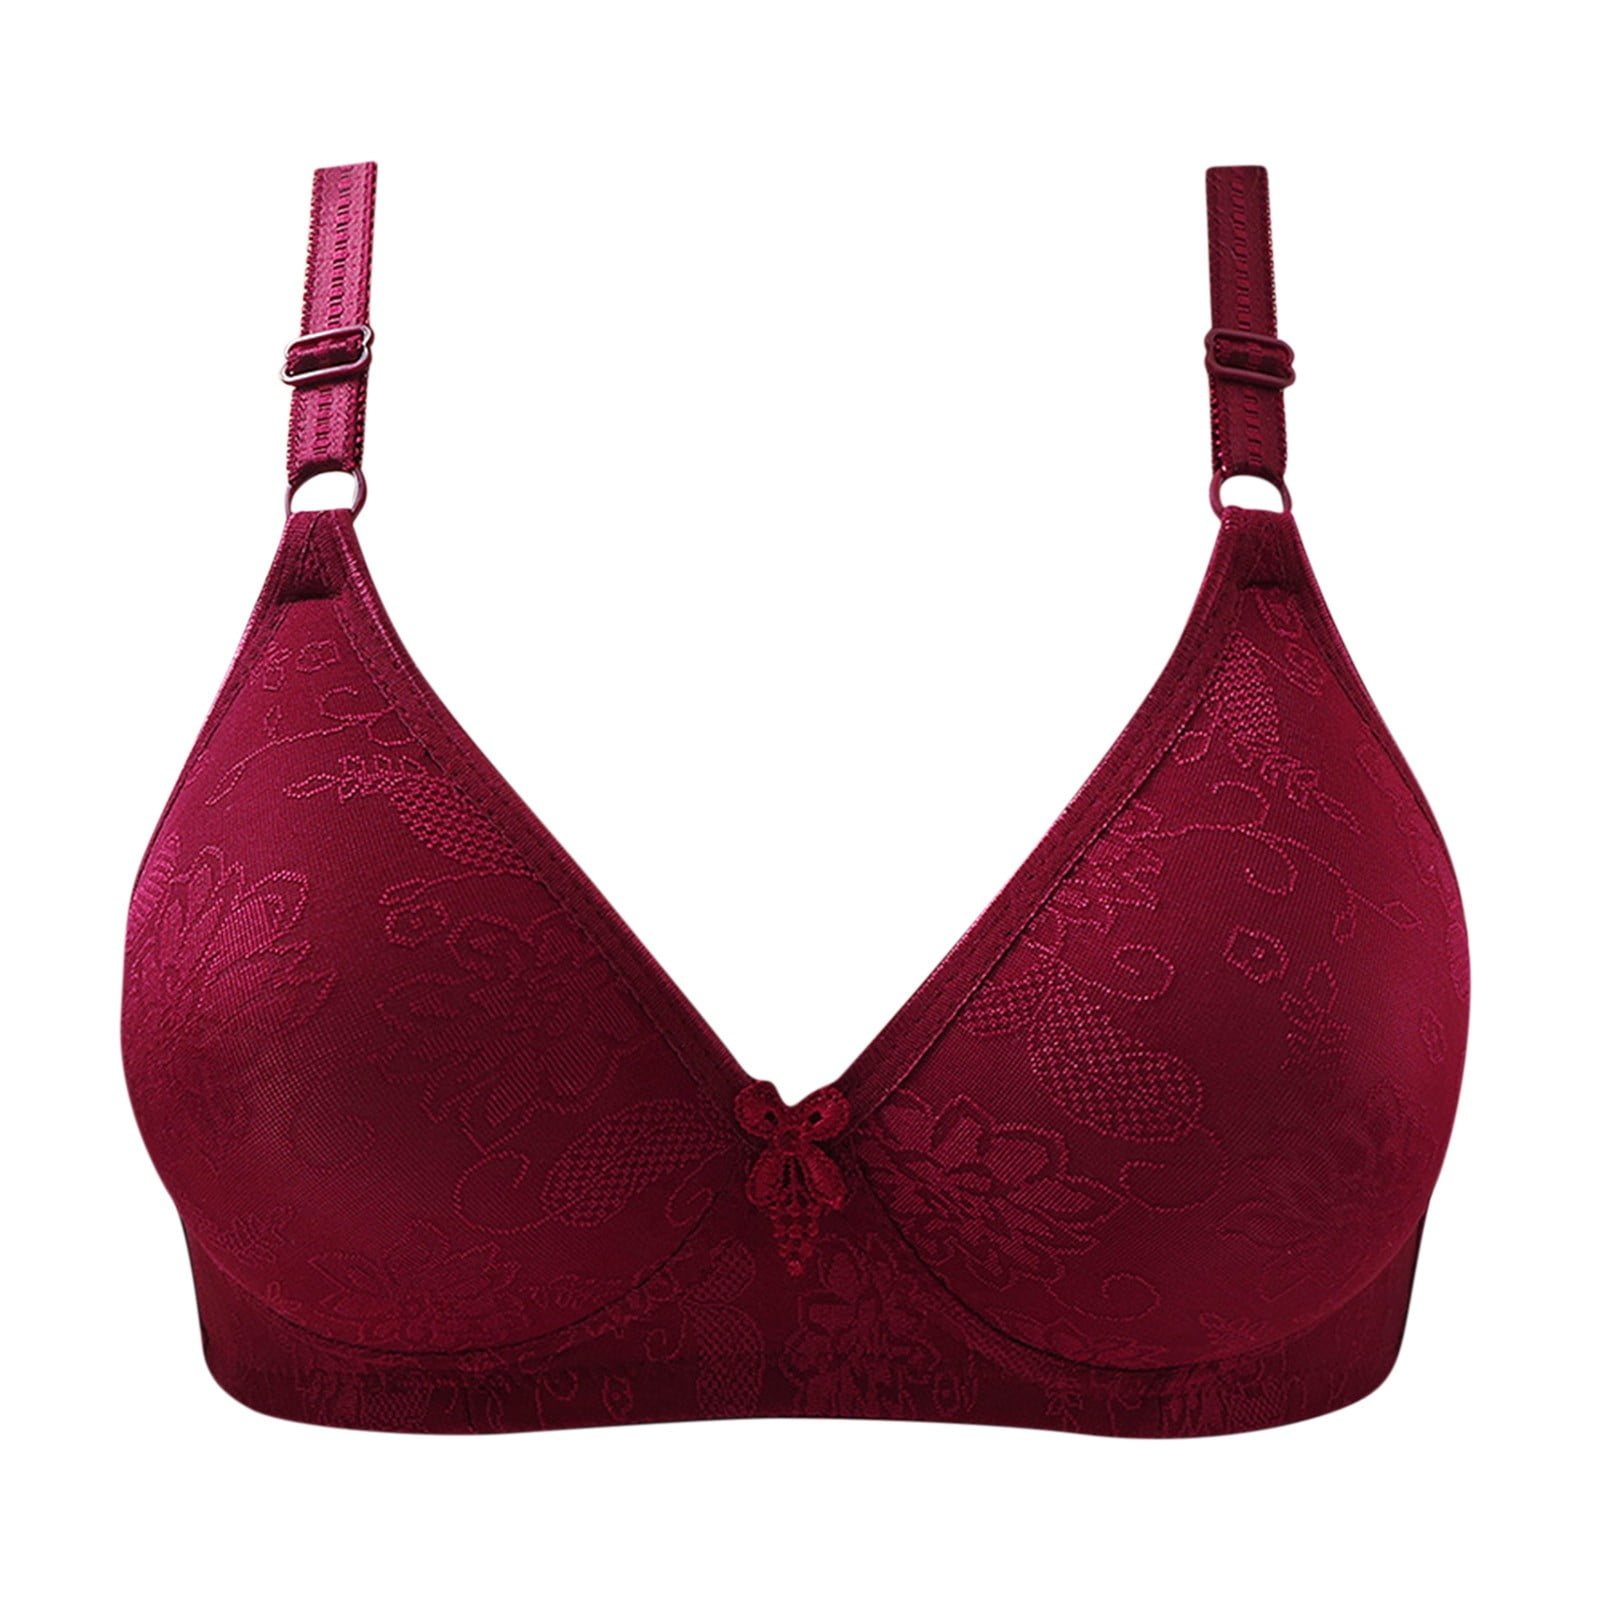 Mallwal Bralettes for Women Plus Size Seamless Bra Feature V-Neck ...